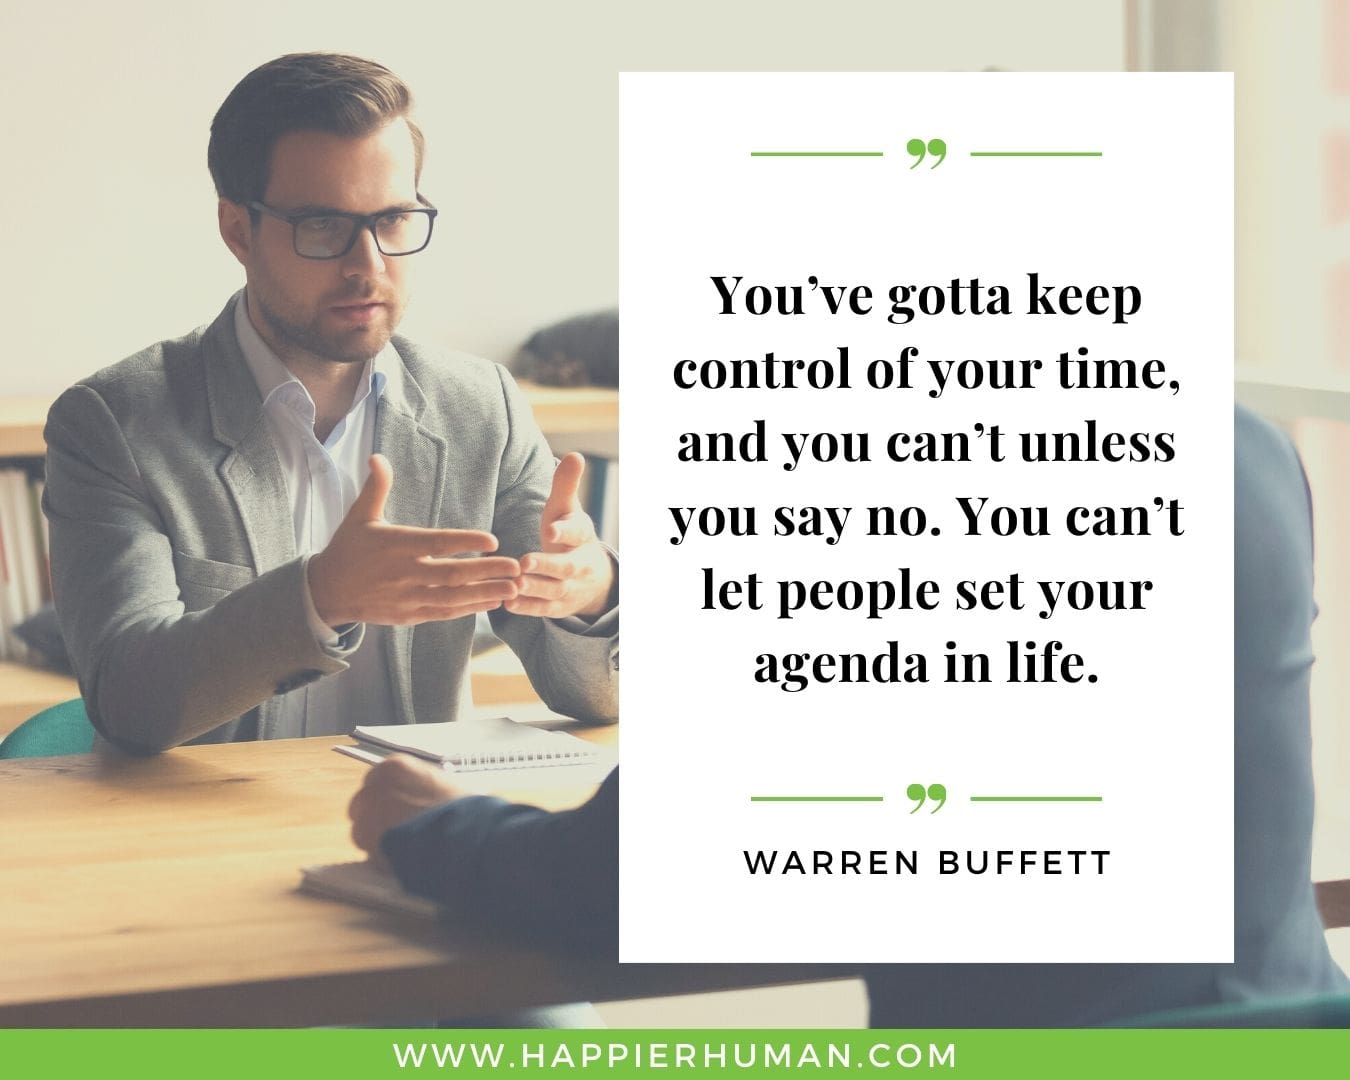 Introvert Quotes - “You’ve gotta keep control of your time, and you can’t unless you say no. You can’t let people set your agenda in life.” – Warren Buffett